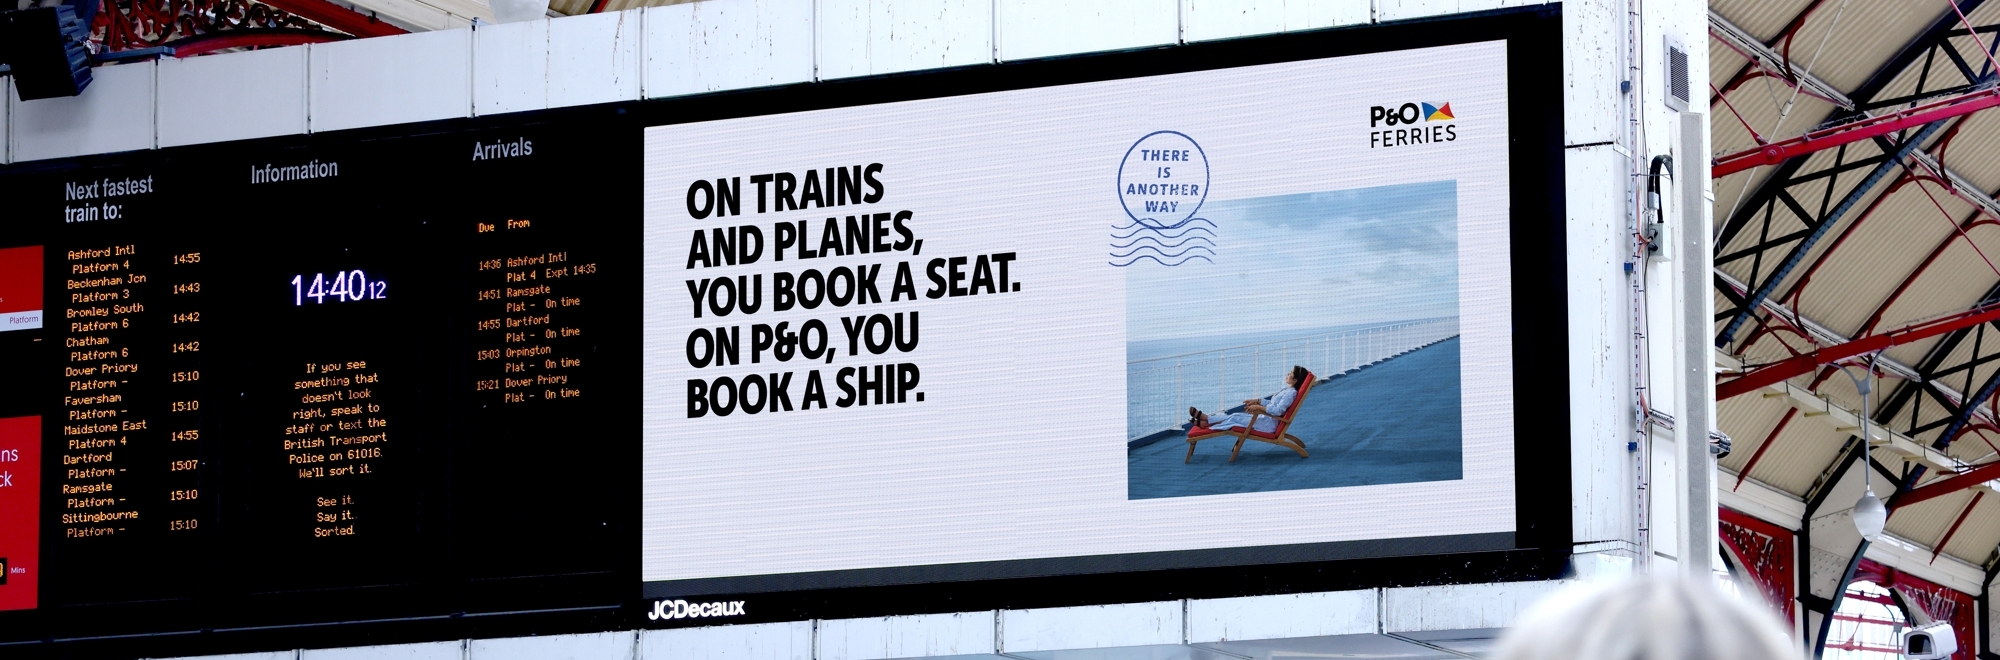 P&O Ferries suggests ‘There is Another Way’ to travel with playful OOH posters